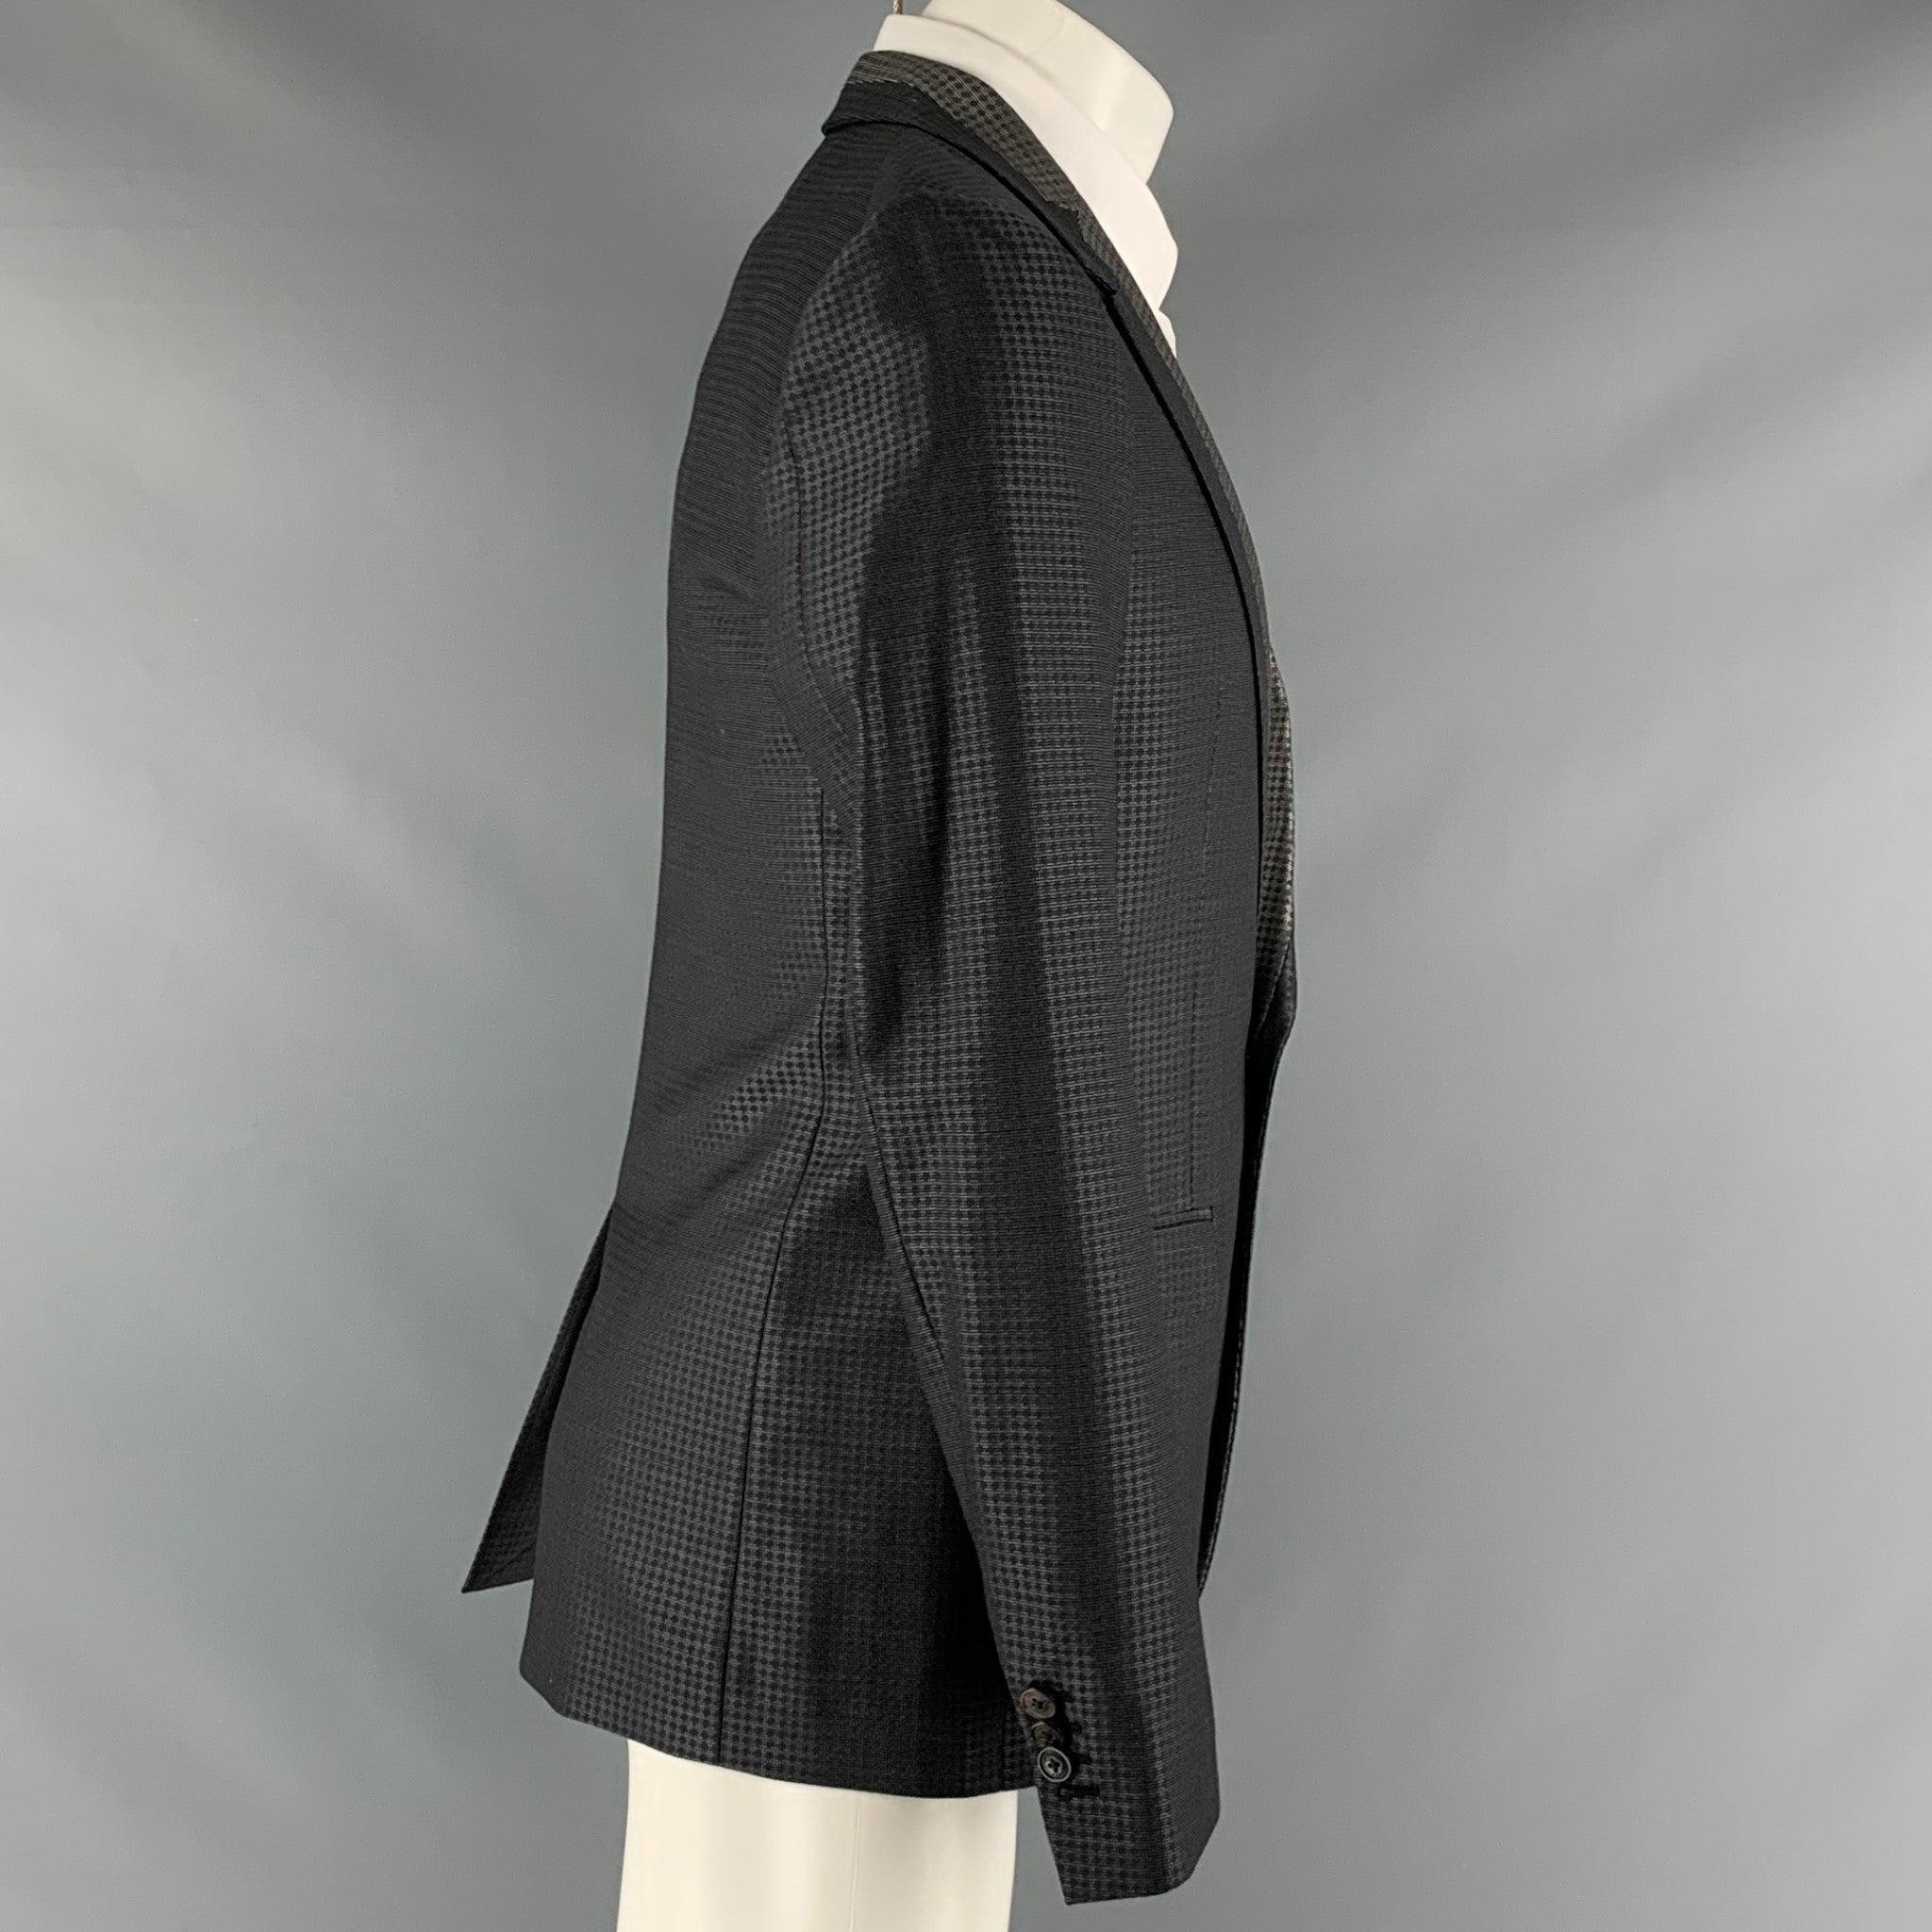 VIKTOR & ROLF sport coat comes in a black and grey plaid wool and silk jacquard material with a full liner featuring a notch lapel, flap pockets, single back vent, and a double button closure. Made in Italy. Excellent Pre-Owned Condition. 

Marked: 